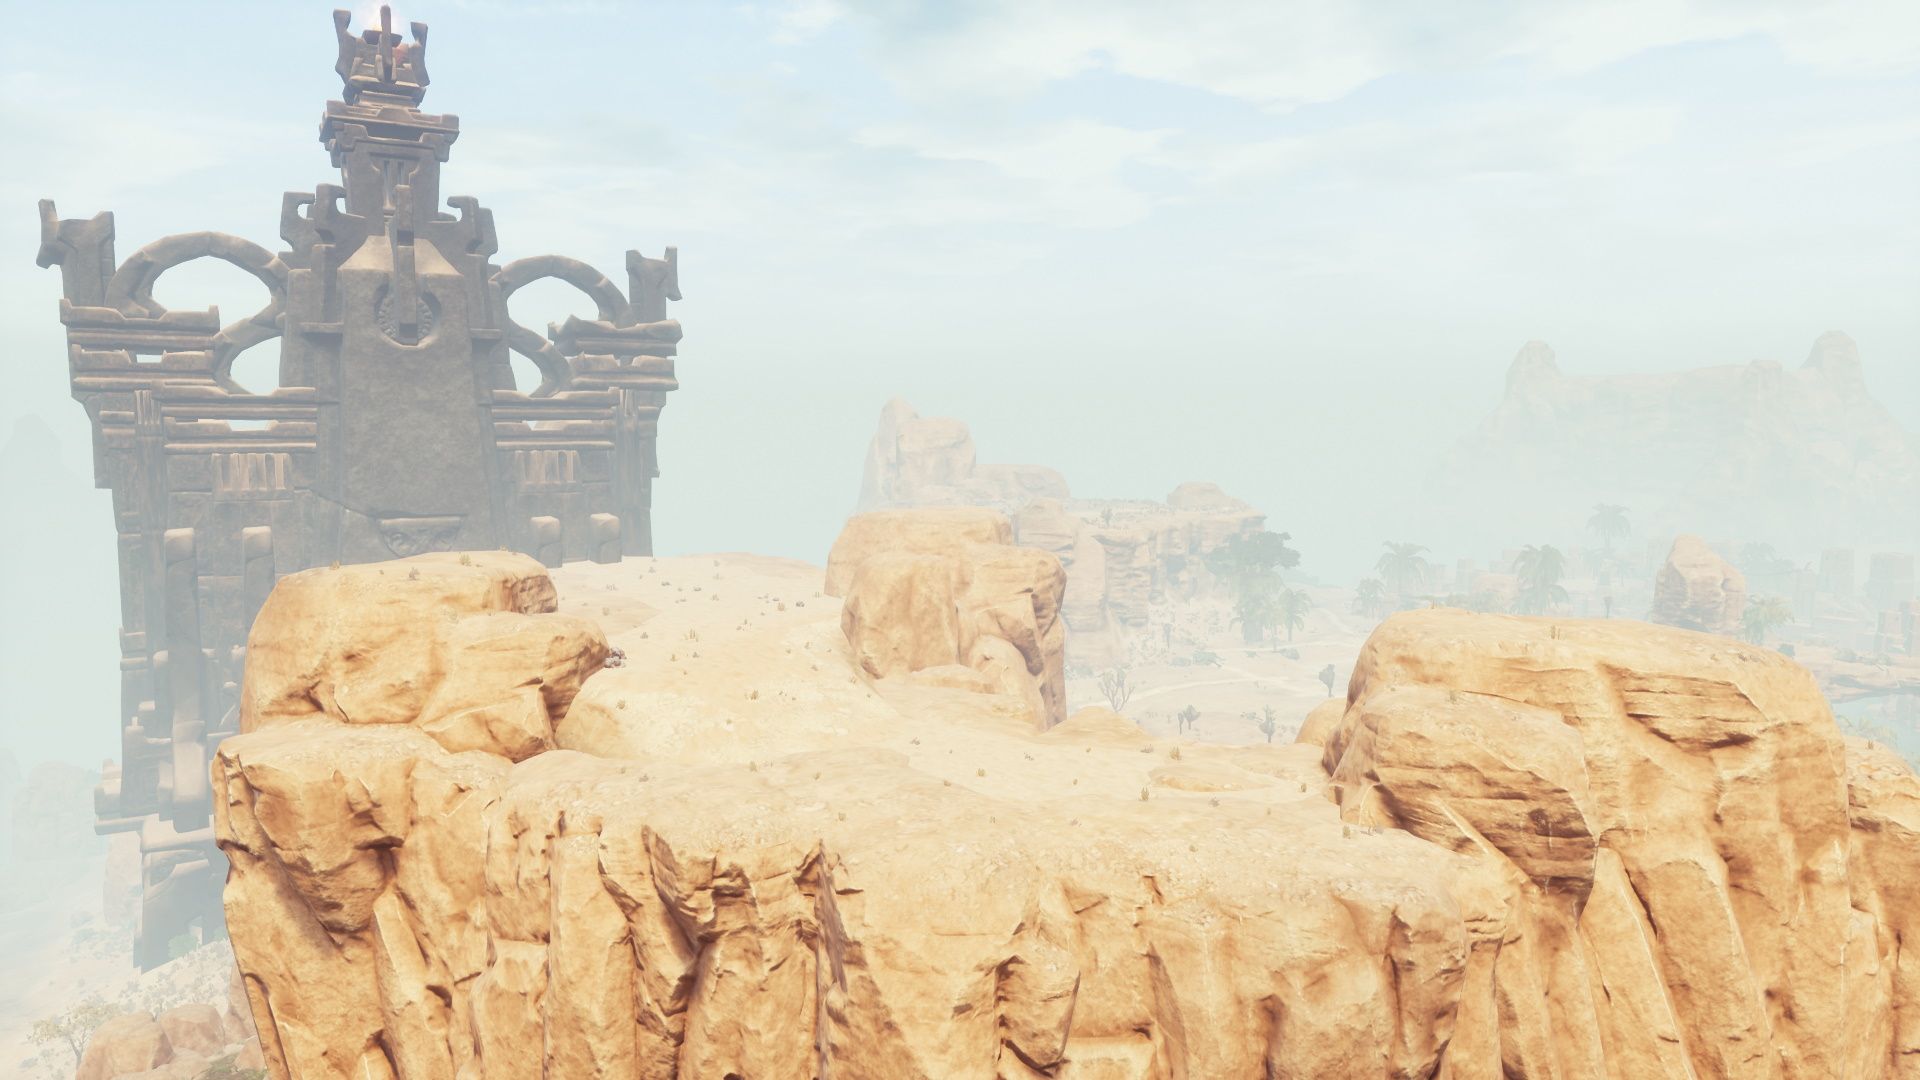 Relicwatcher_Rise in conan exiles